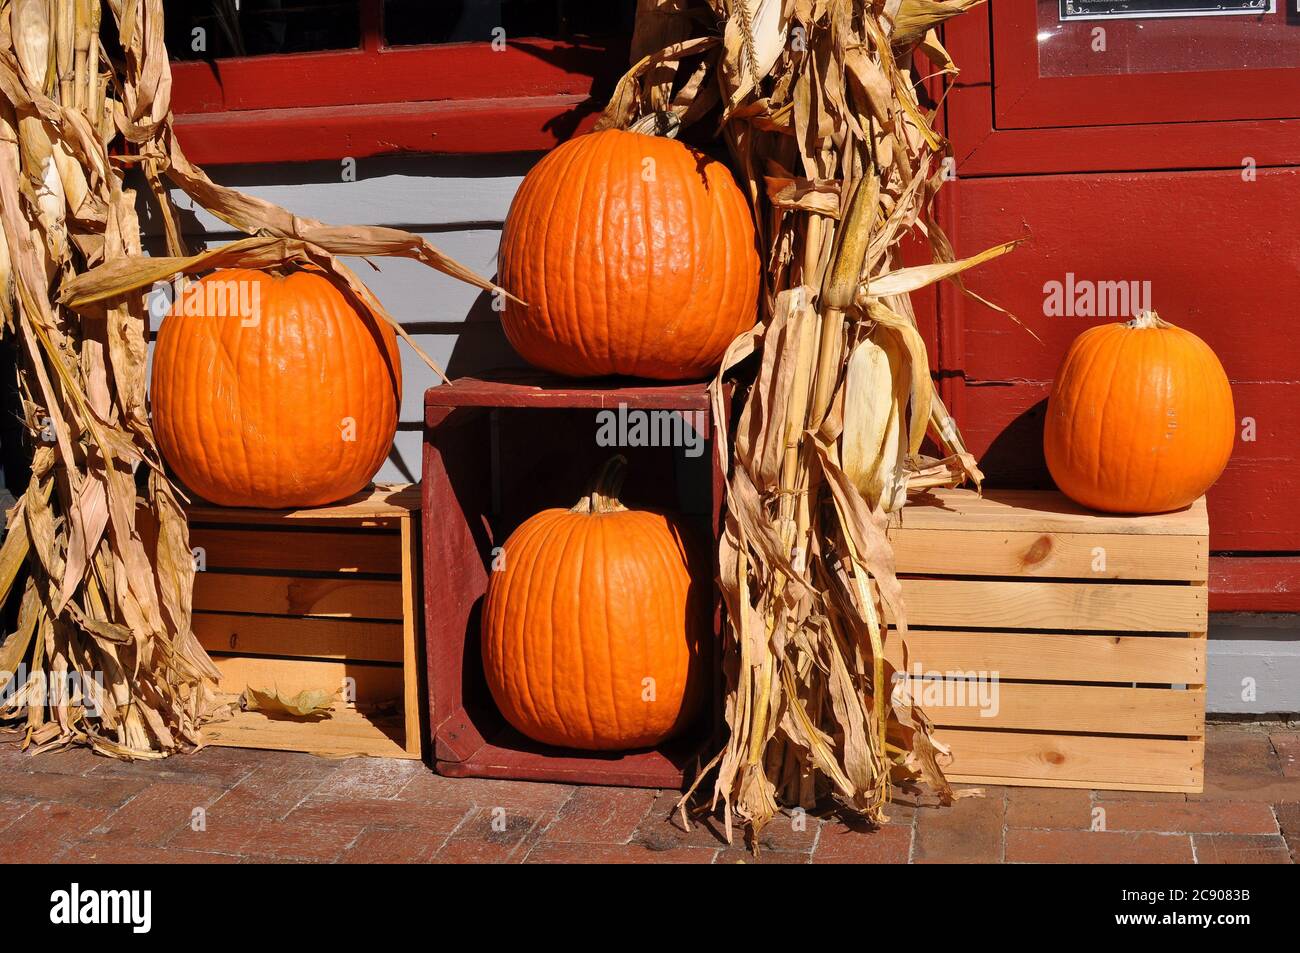 Orange pumpkins on wooden crates as symbol of Autumn and the Fall season Stock Photo